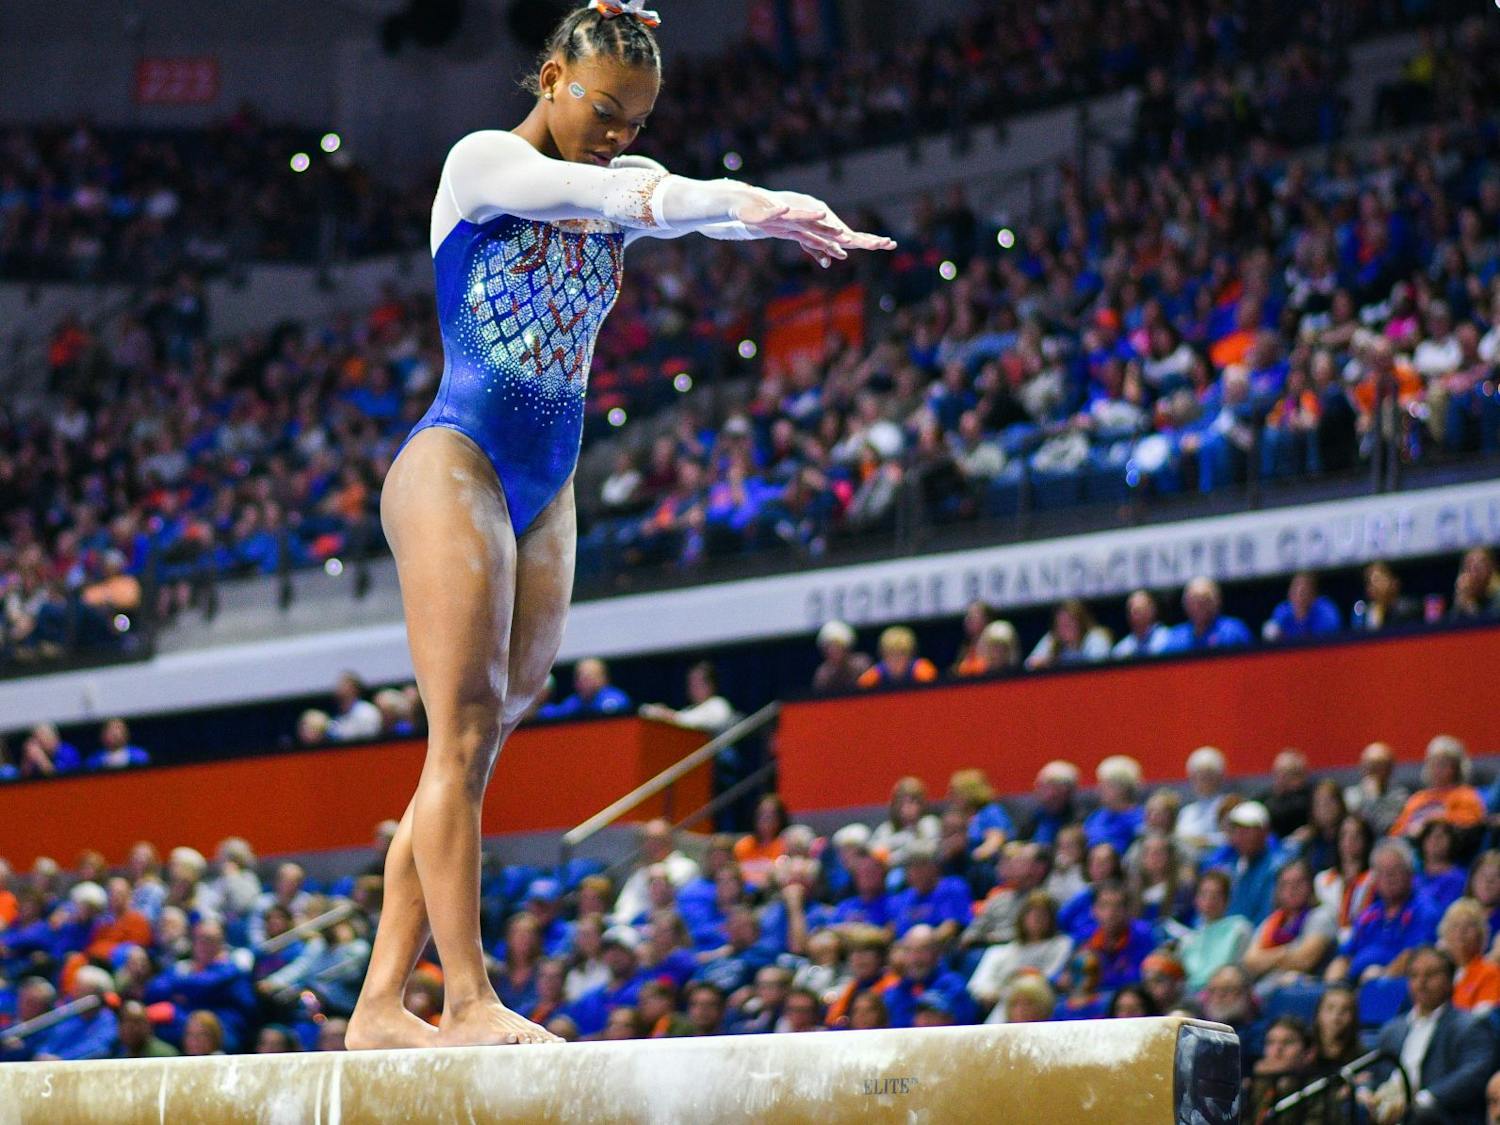 UF gymnast Trinity Thomas earned her second-straight SEC Freshman of the Week honors following her performance at LSU. She recorded an all-around score of 39.650, including &nbsp;a 9.950 on her floor routine.